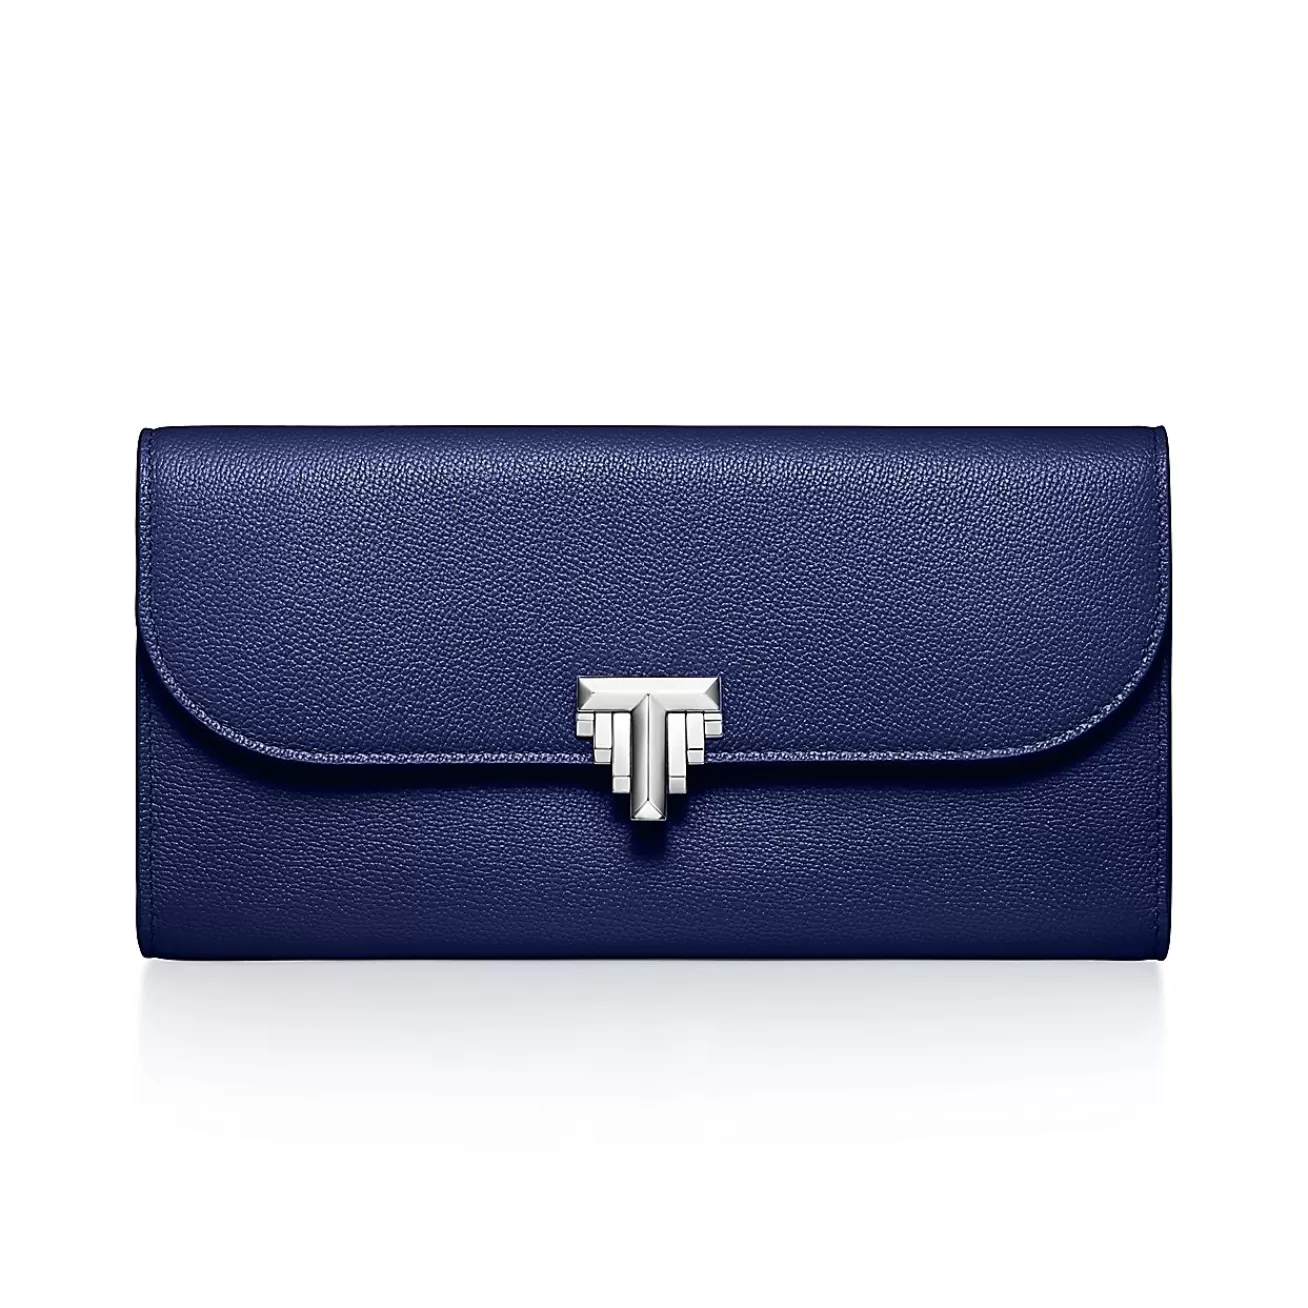 Tiffany & Co. Tiffany T Deco Continental Wallet in Sapphire Blue Leather | ^Women Small Leather Goods | Women's Accessories